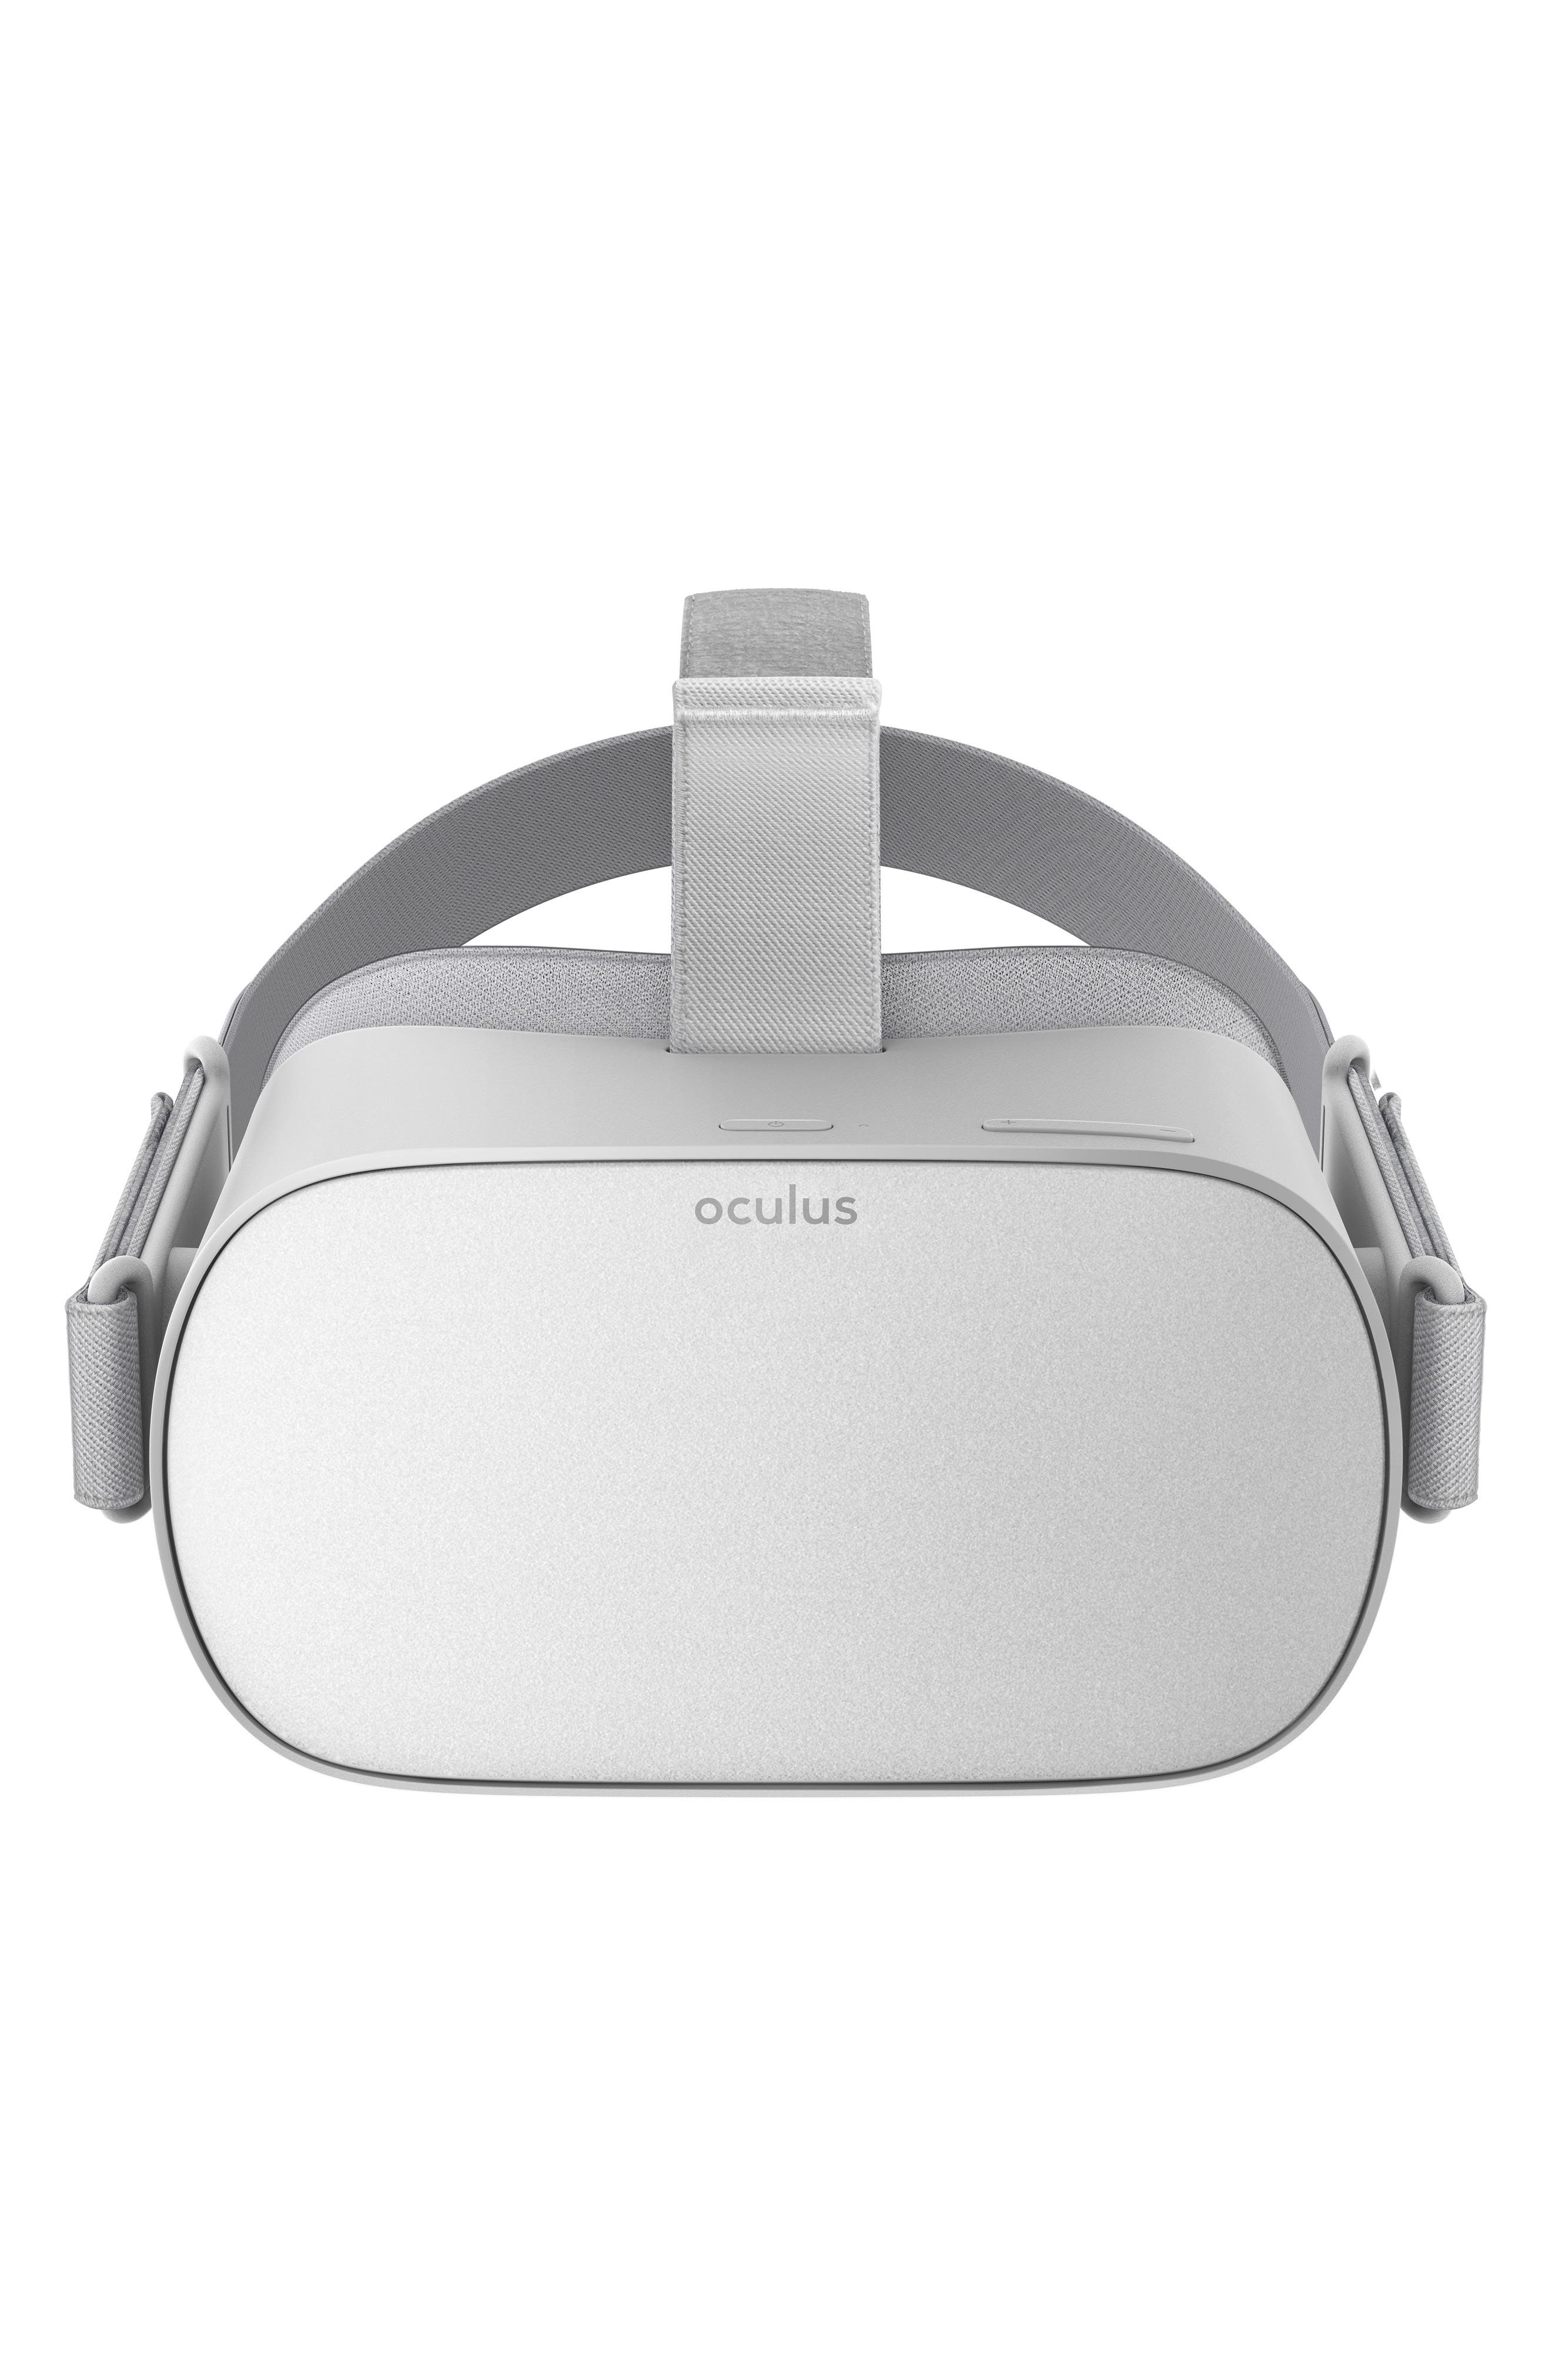 oculus go store gift card